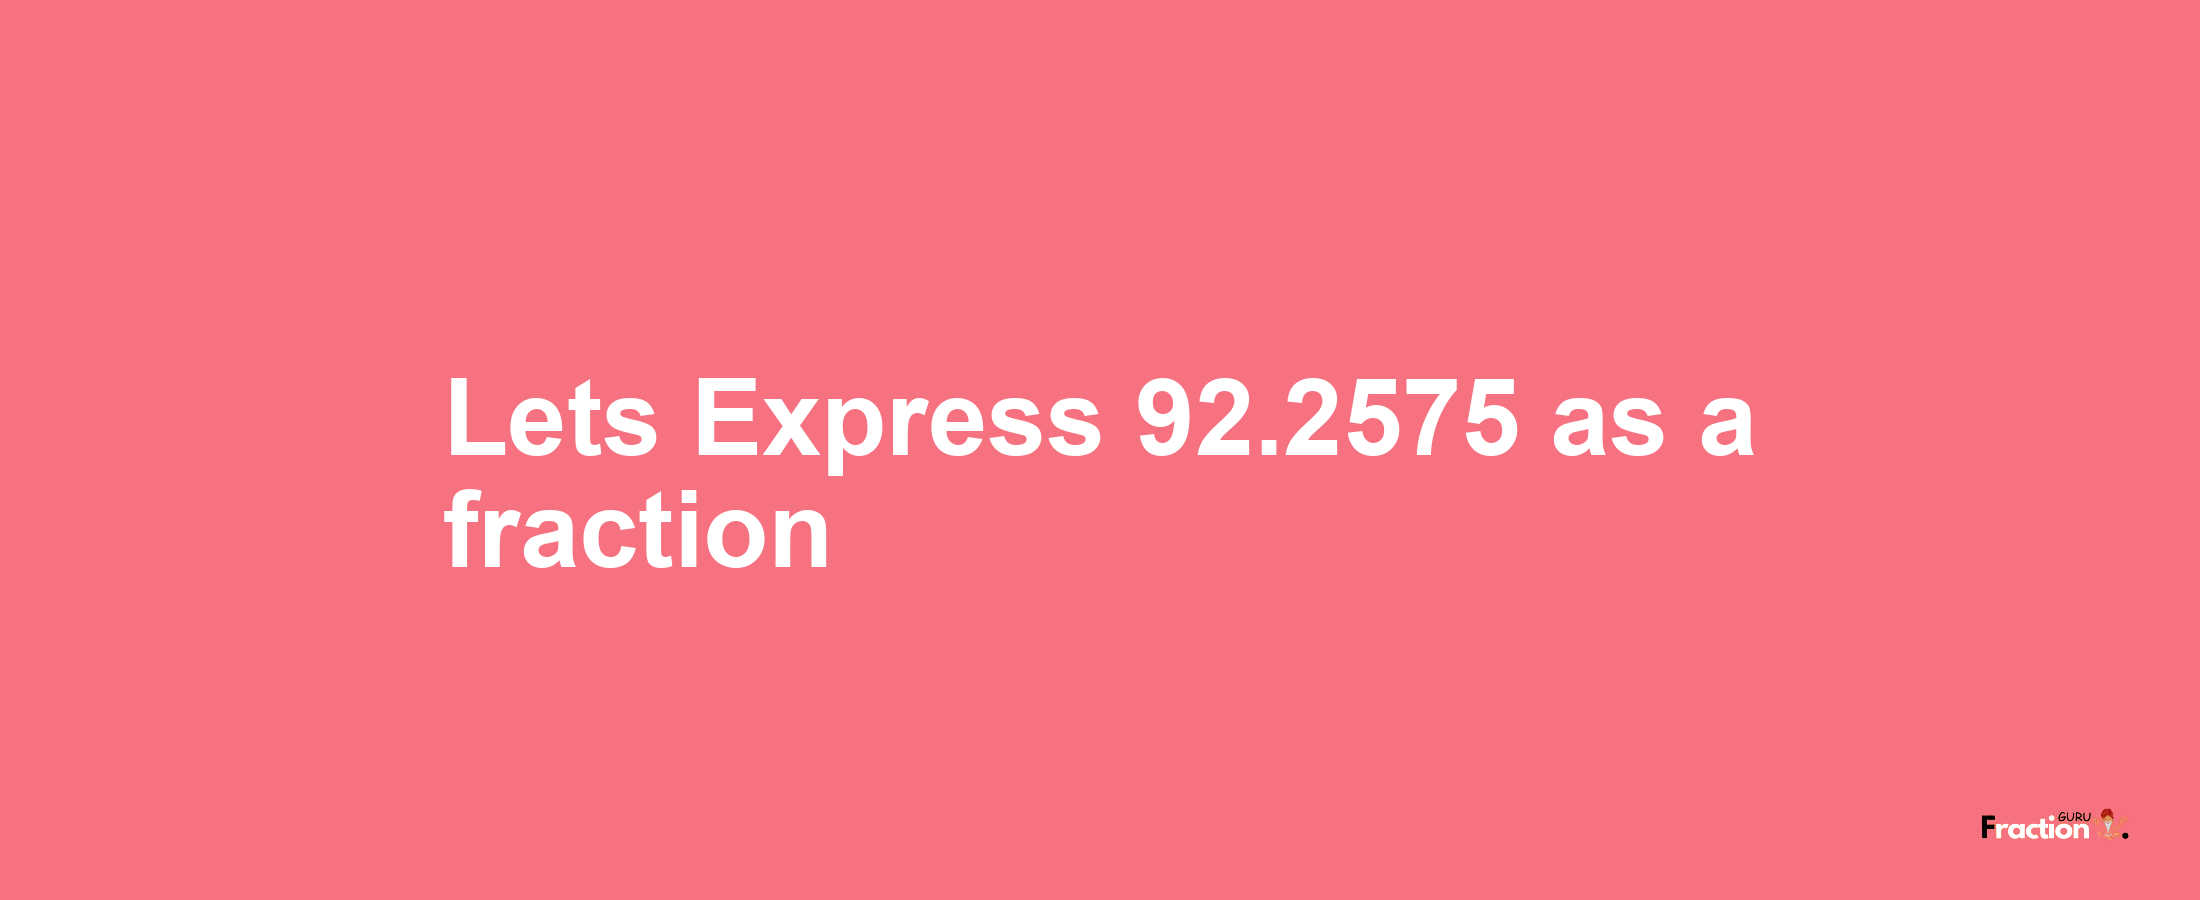 Lets Express 92.2575 as afraction